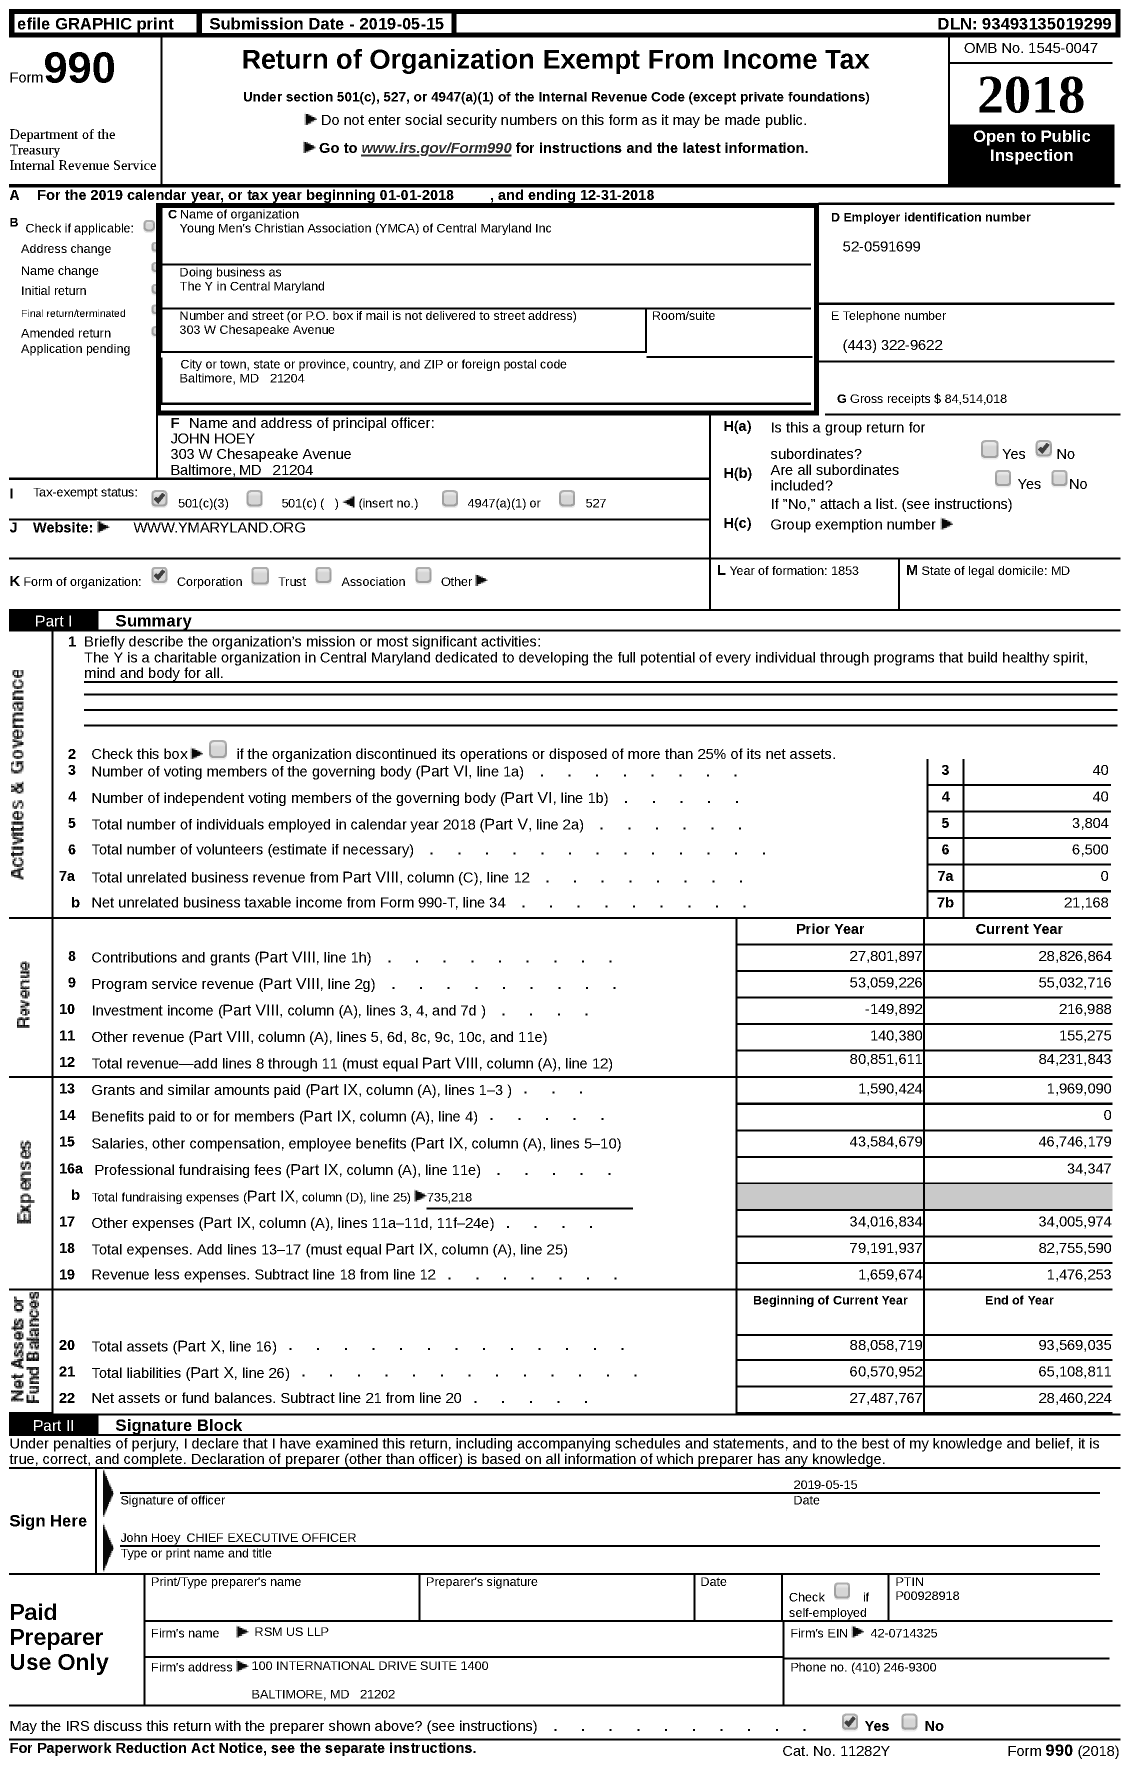 Image of first page of 2018 Form 990 for The Y in Central Maryland